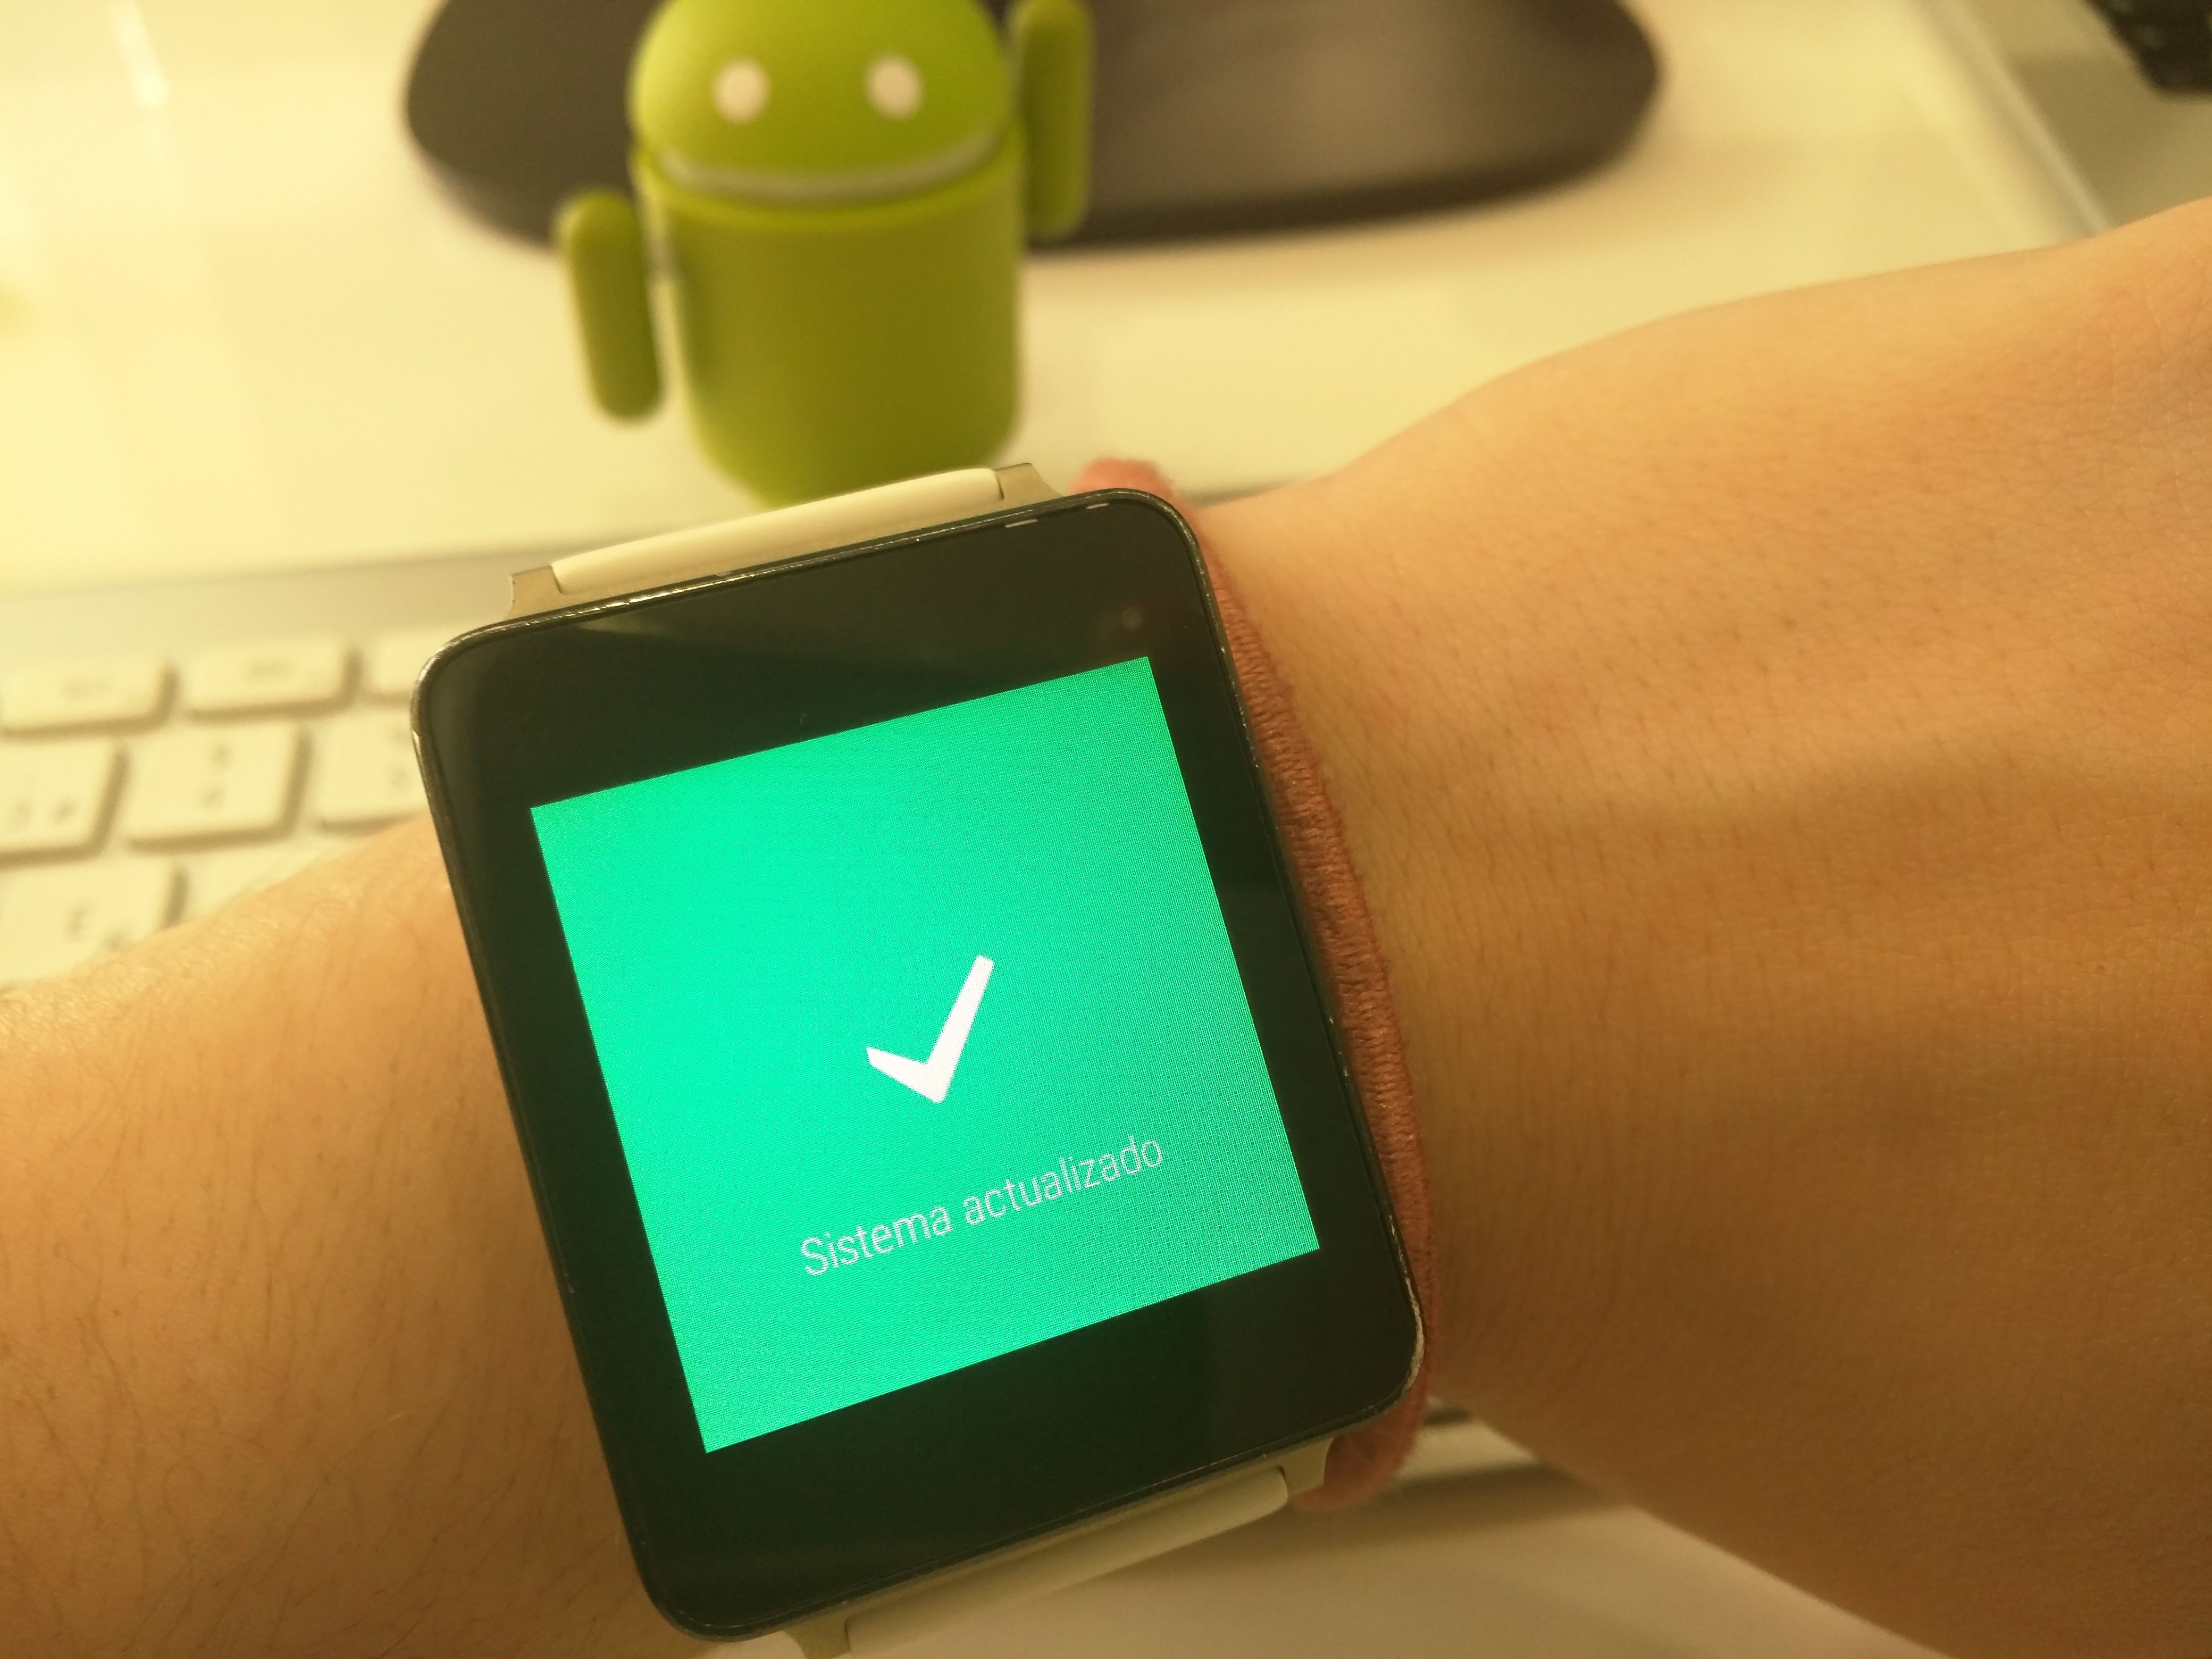 actualizar-lg-g-watch-android-wear-5.1.1